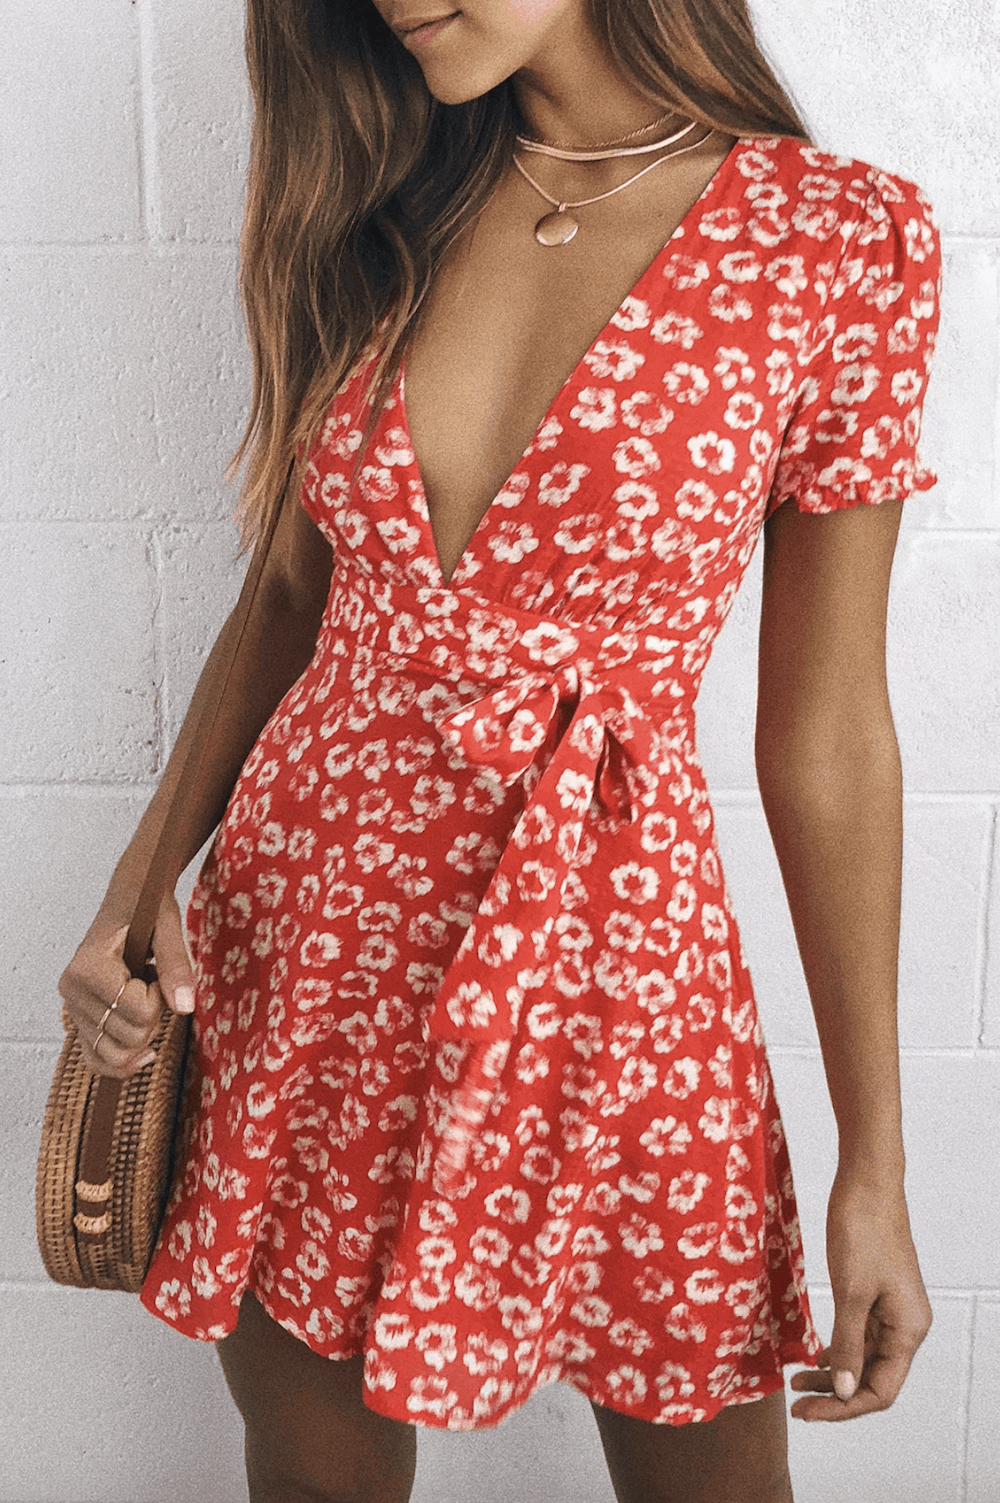 Summer Honeymoon Outfits for Her Red Floral Print Mini Dress